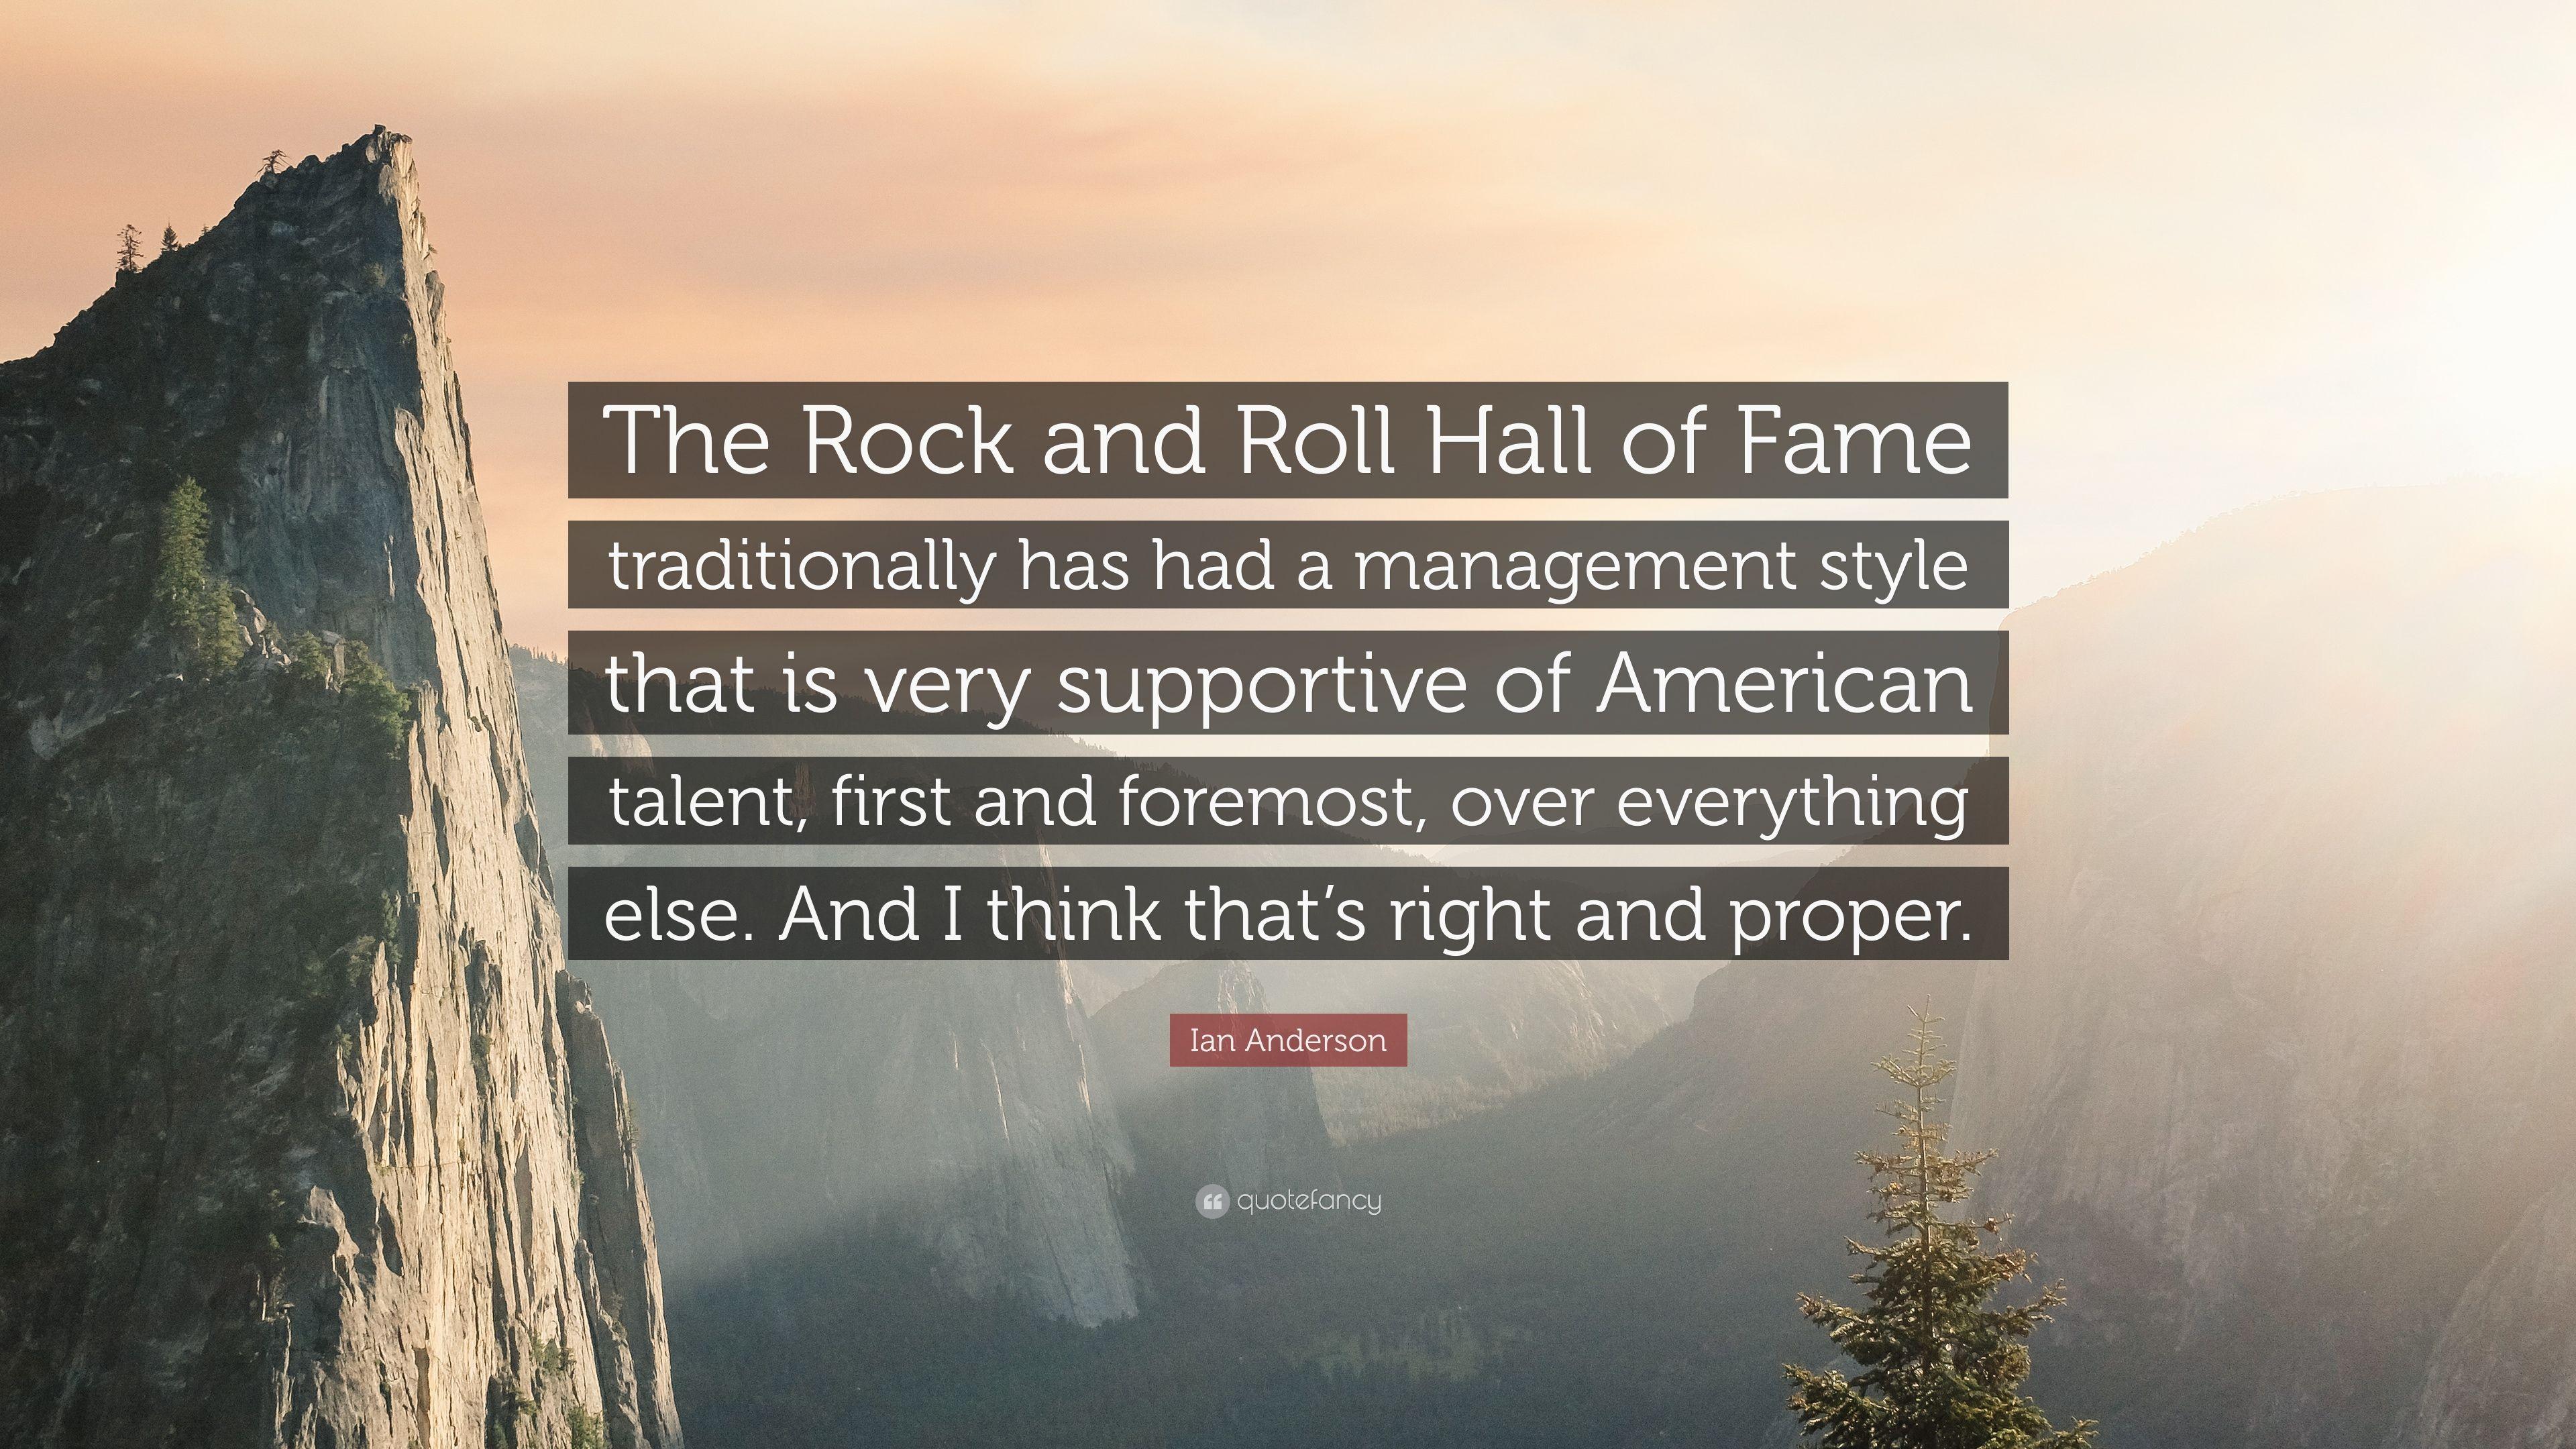 Ian Anderson Quote: “The Rock and Roll Hall of Fame traditionally